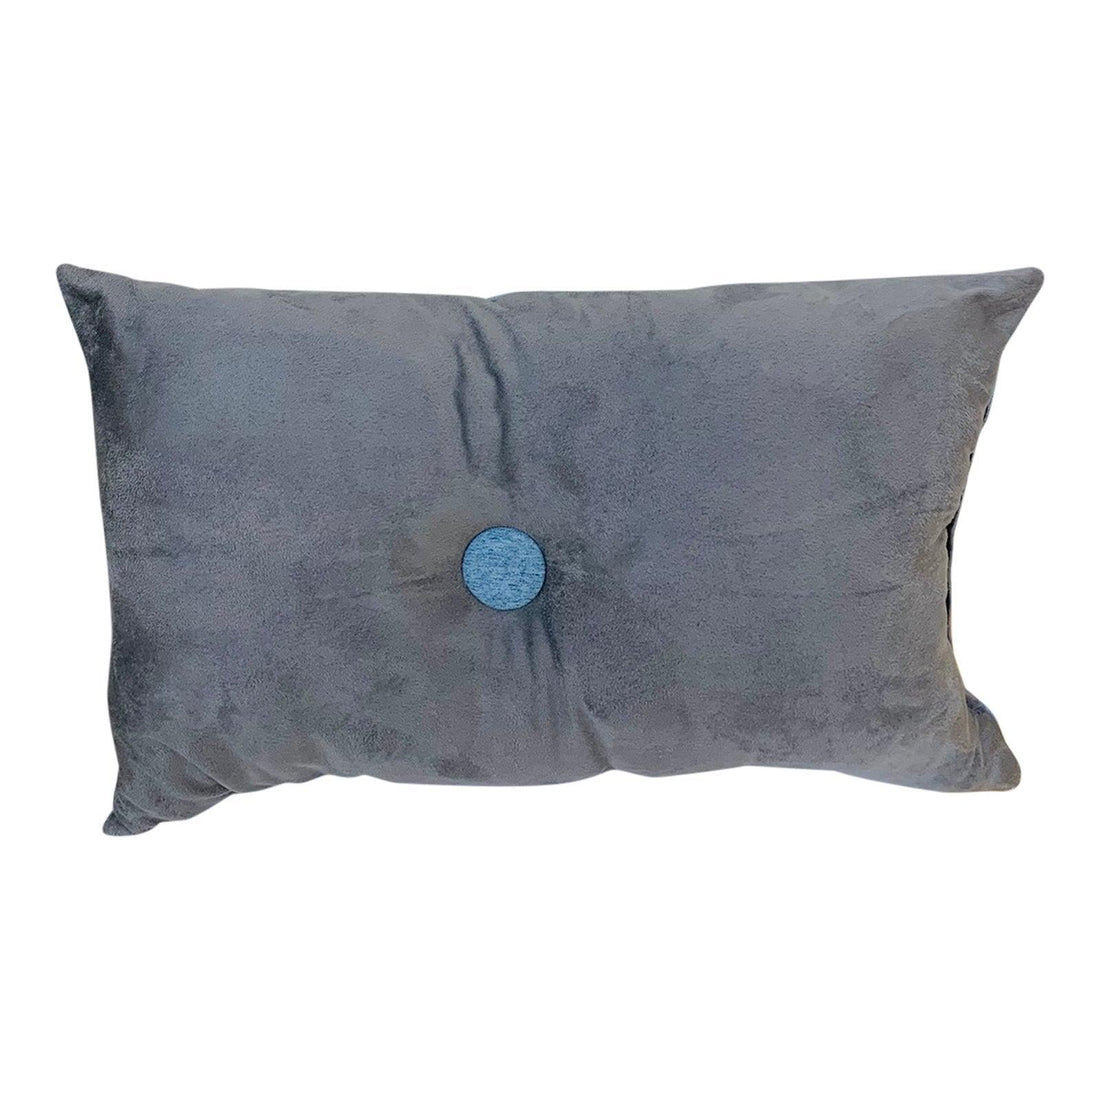 Double Side Rectangular Scatter Cushion Grey 45cm - £26.99 - Throw Pillows 